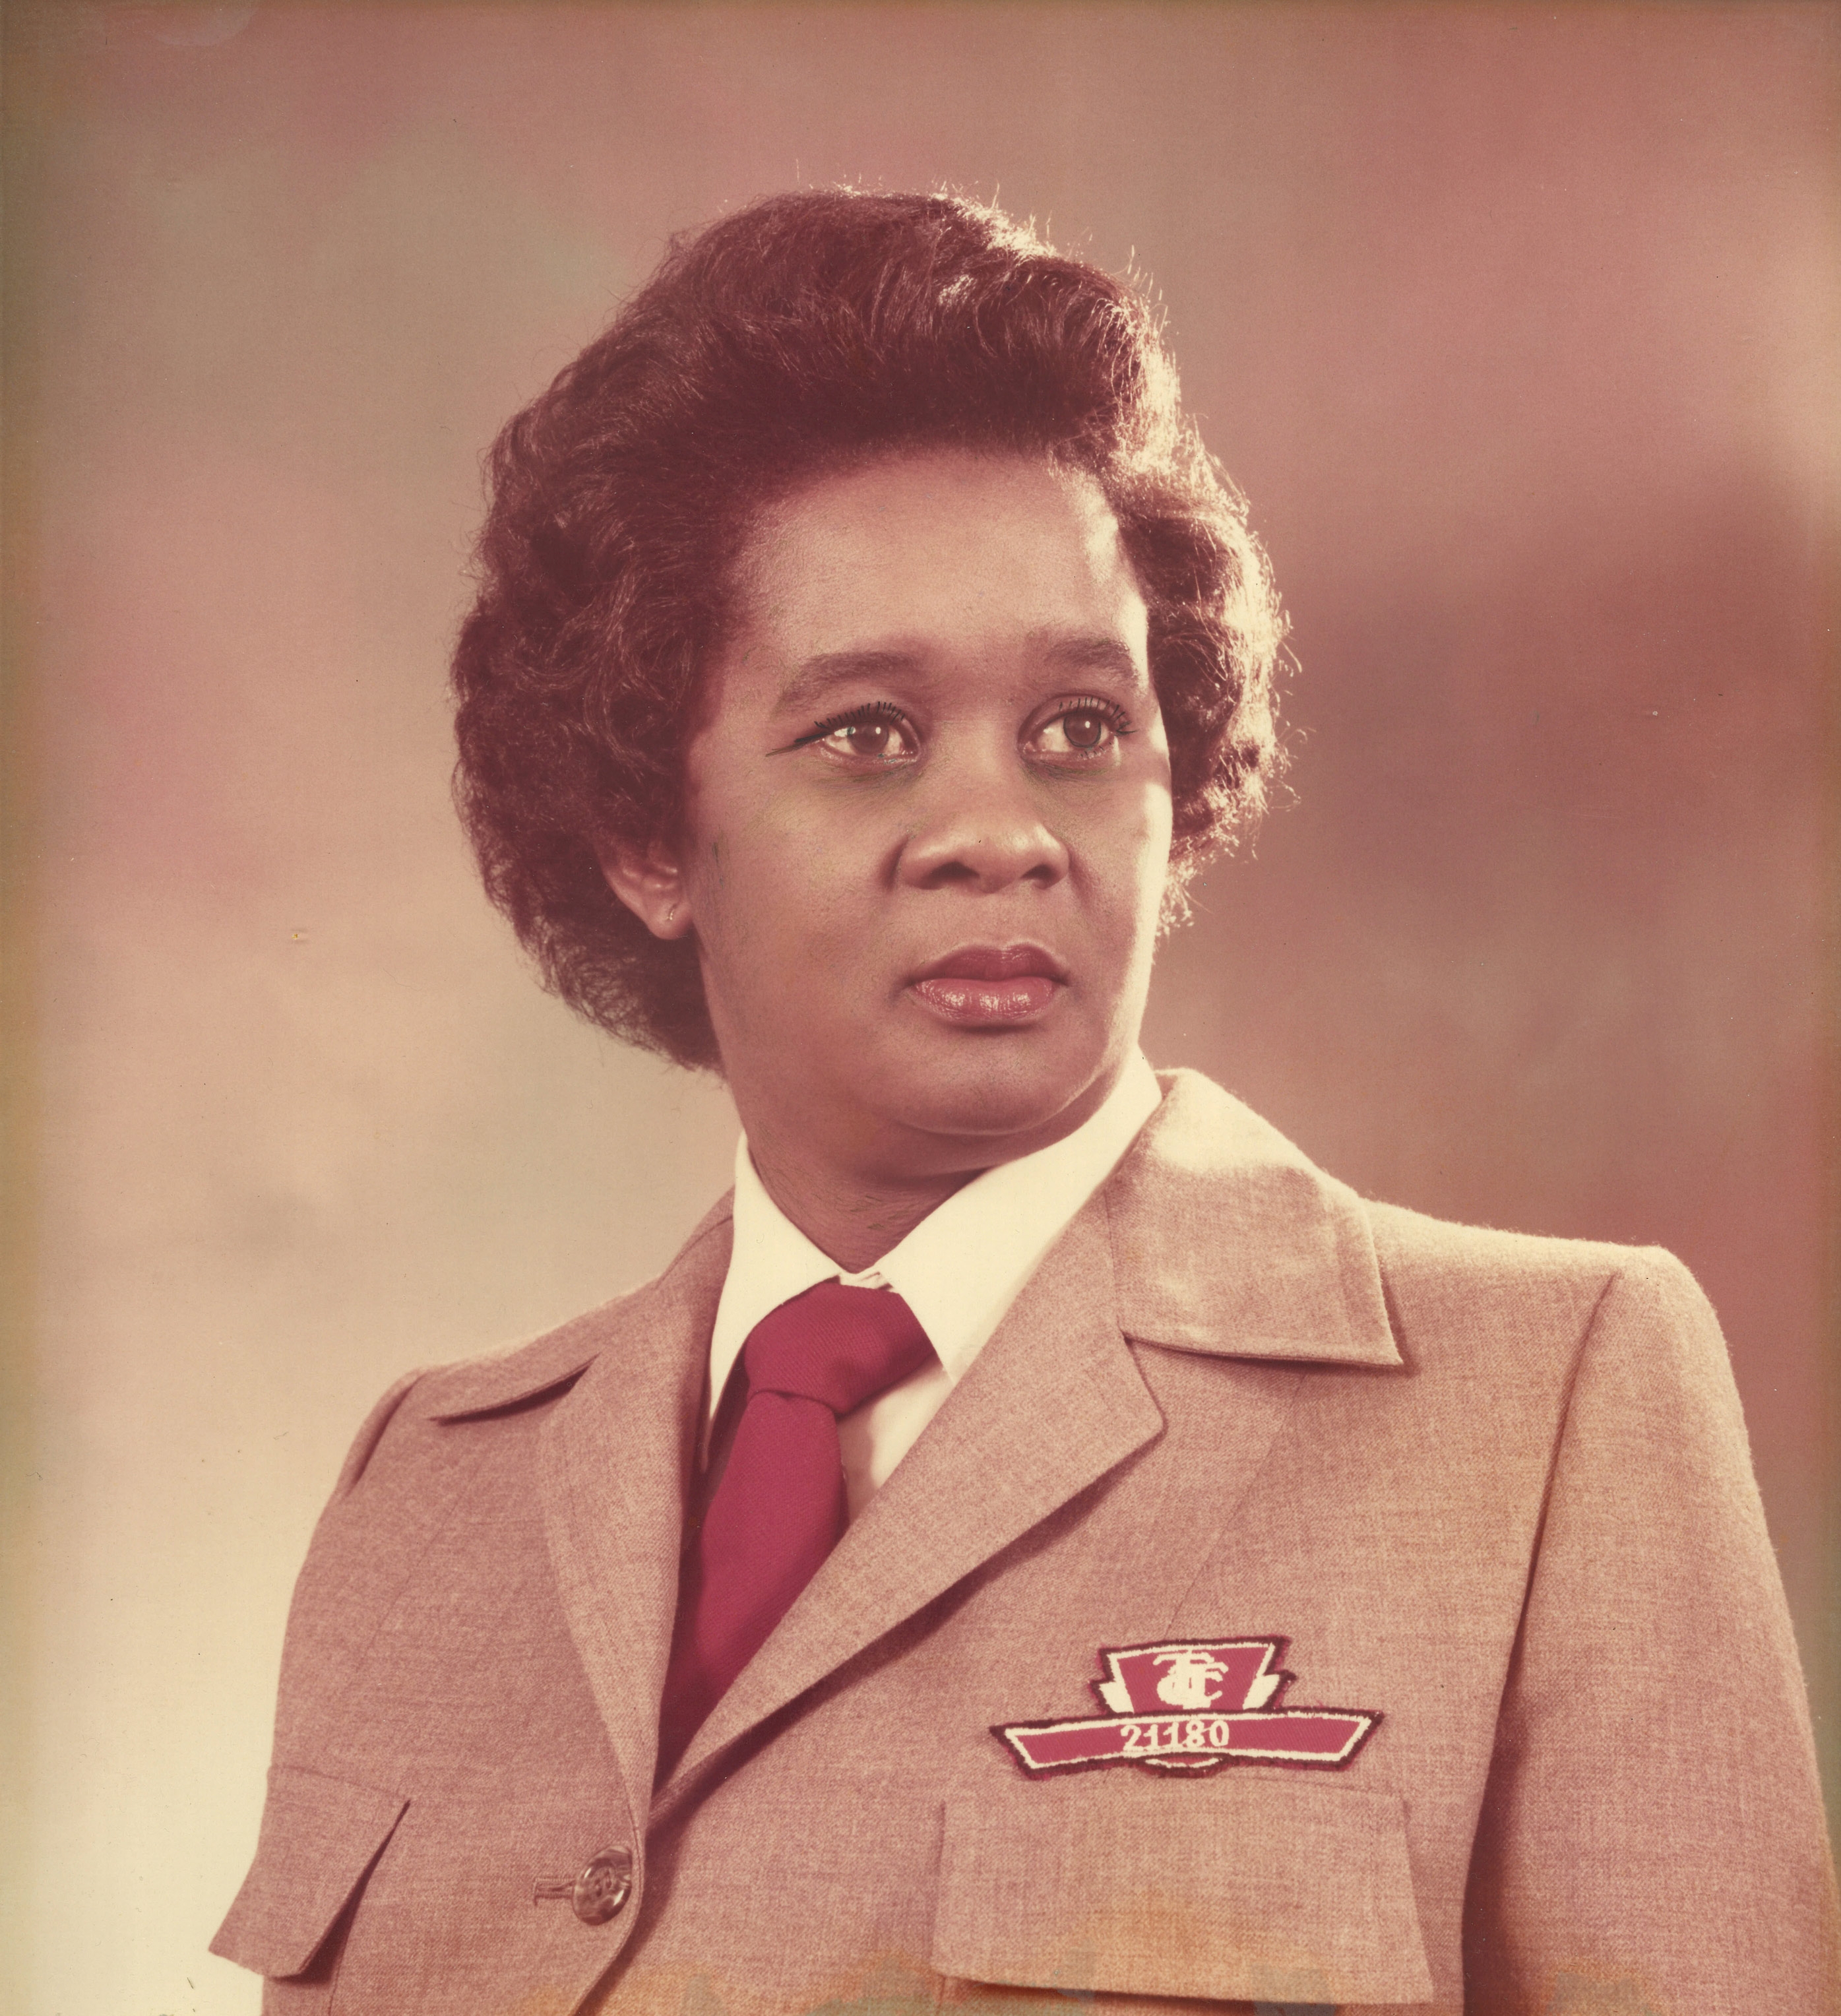 Introducing Irma James – a trailblazing Operator at the TTC who moved Toronto for almost a quarter of a century